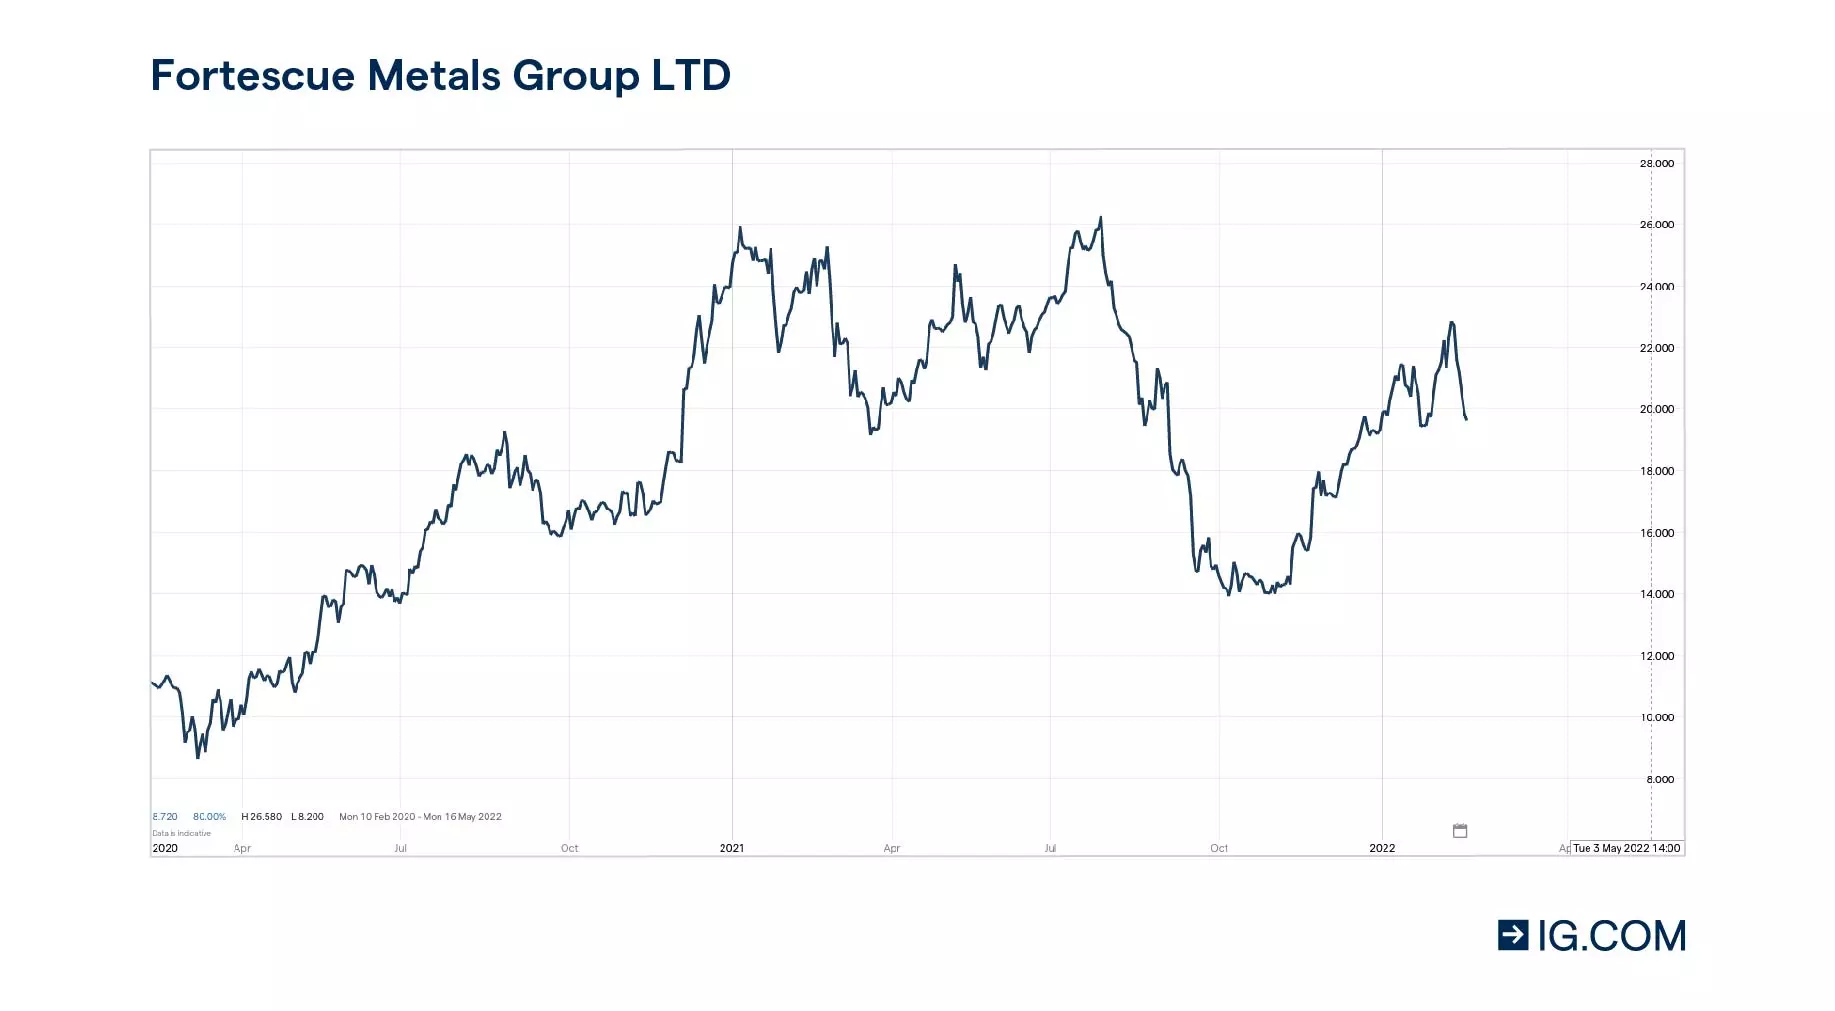 Fortescue Metals Group price chart showing how the share price rose from about $8.20 in February 2020 to averaging about $25 in early 2021and August 2021. The share price then fell to $15 around October 2021 and then increased to $21.30 in February 2022.